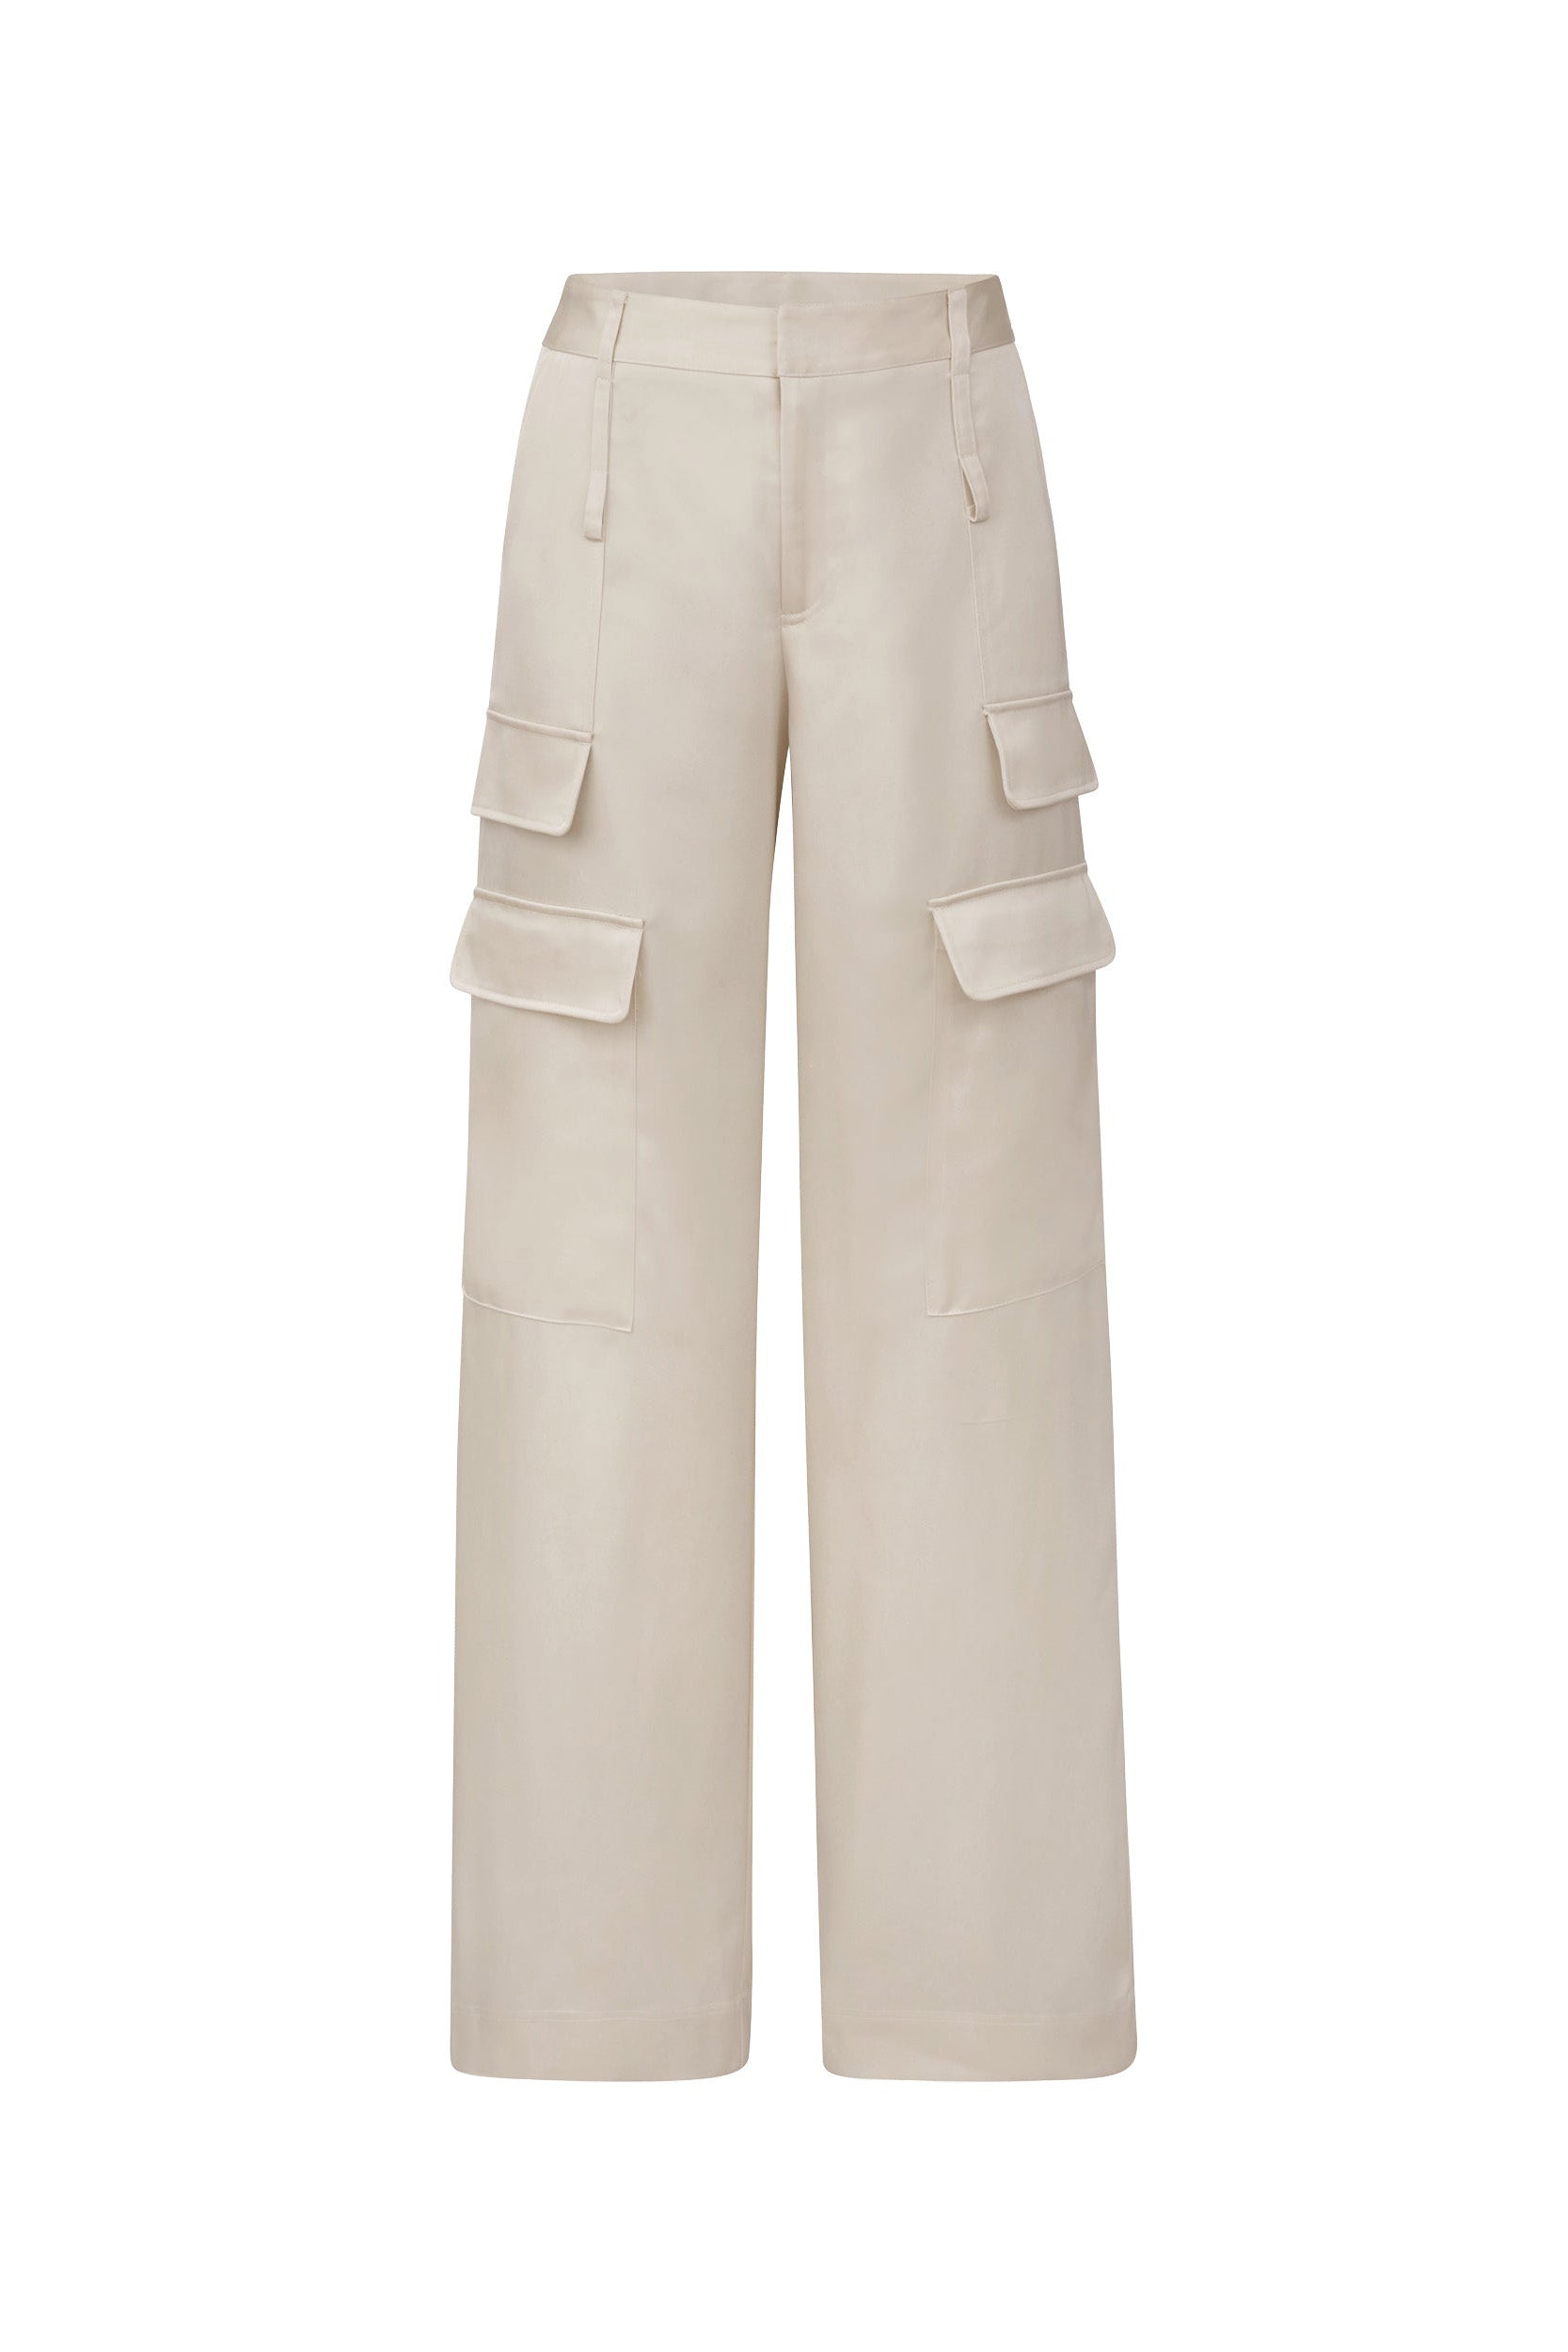 The Milan Satin Cargo Pant - Pearl features a beige, wide-legged design with two large flap pockets on each side. These mid-rise pants include belt loops and are crafted from lightweight, satin-like fabric.